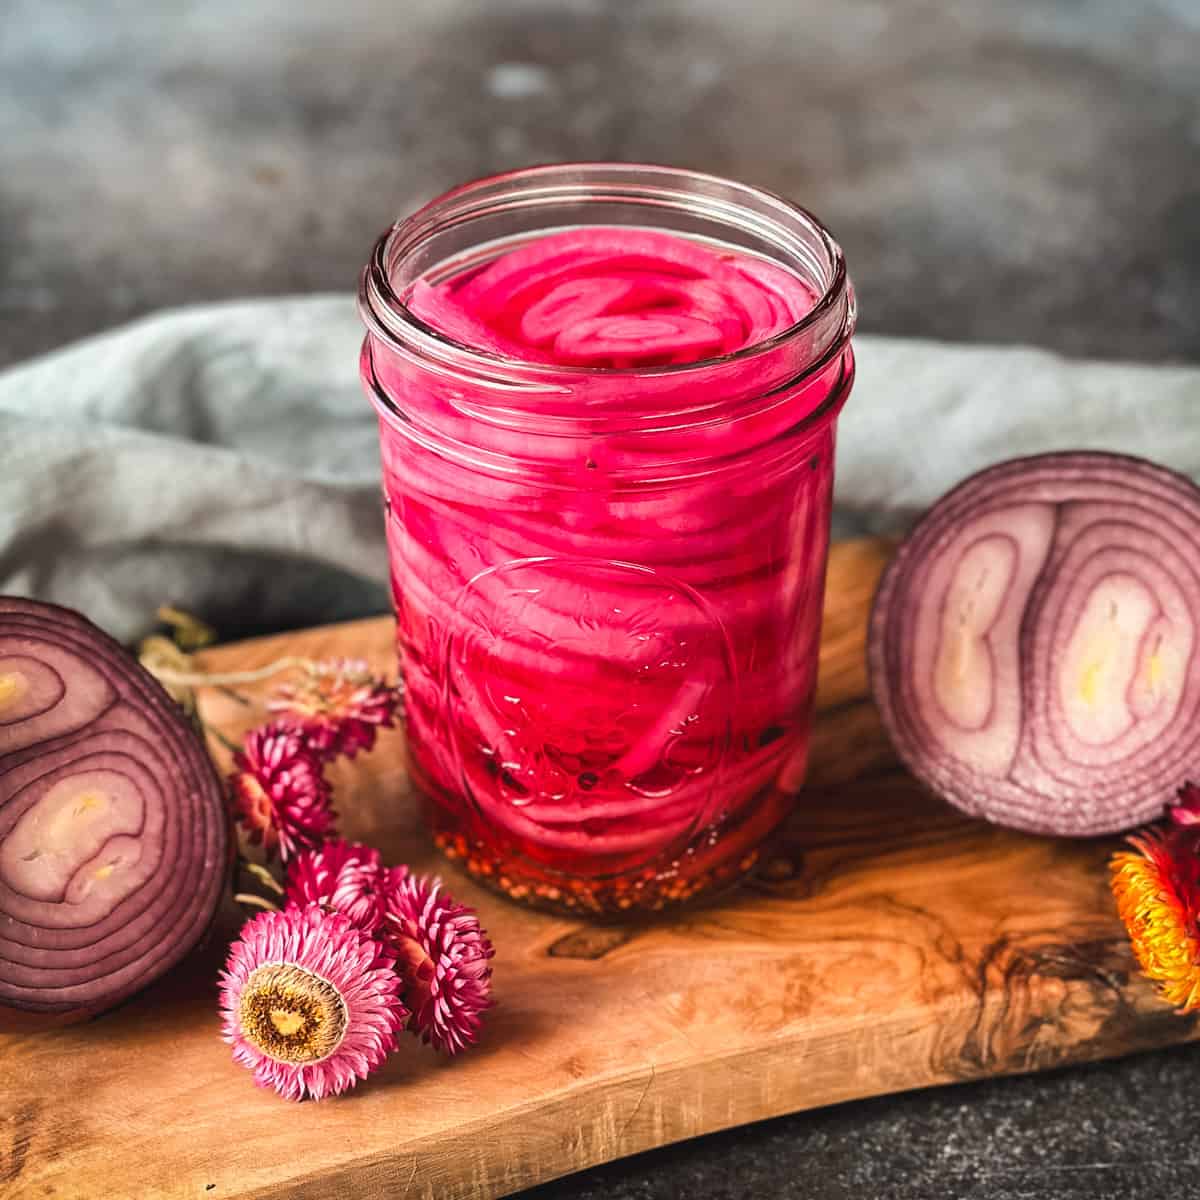 A jar of beautiful pink pickled onions on a wood cutting board surrounded by a red onion cut in half and dried pink flowers. 